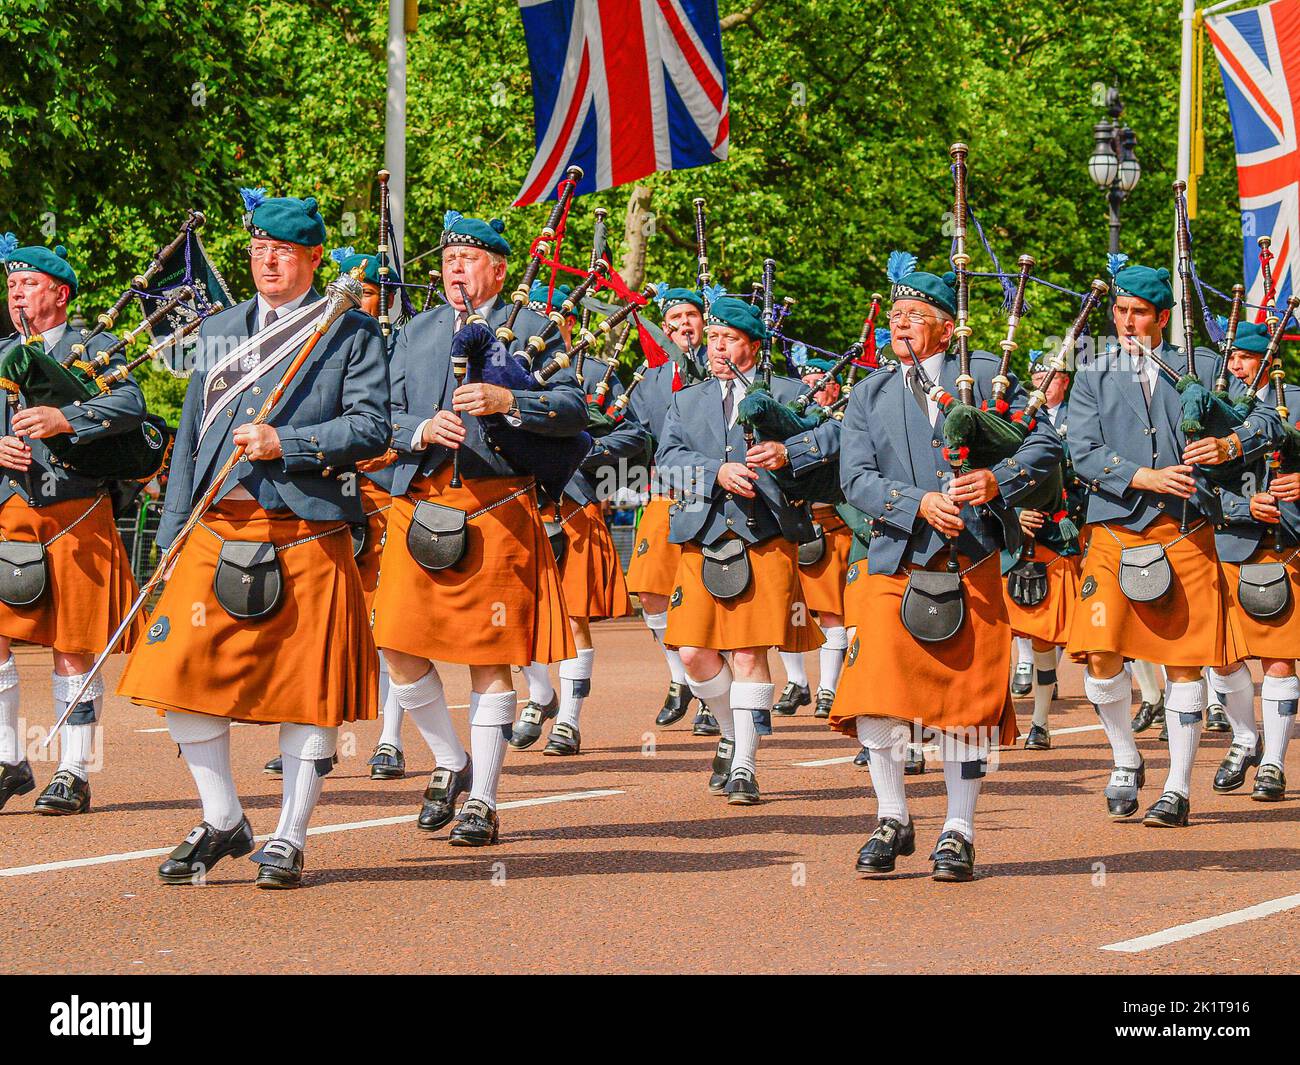 London United Kingdom June 15 2009; Typical British pomp and ceremony on The Mall marchers and bagpipes under draped Union Jack Flags.. Stock Photo